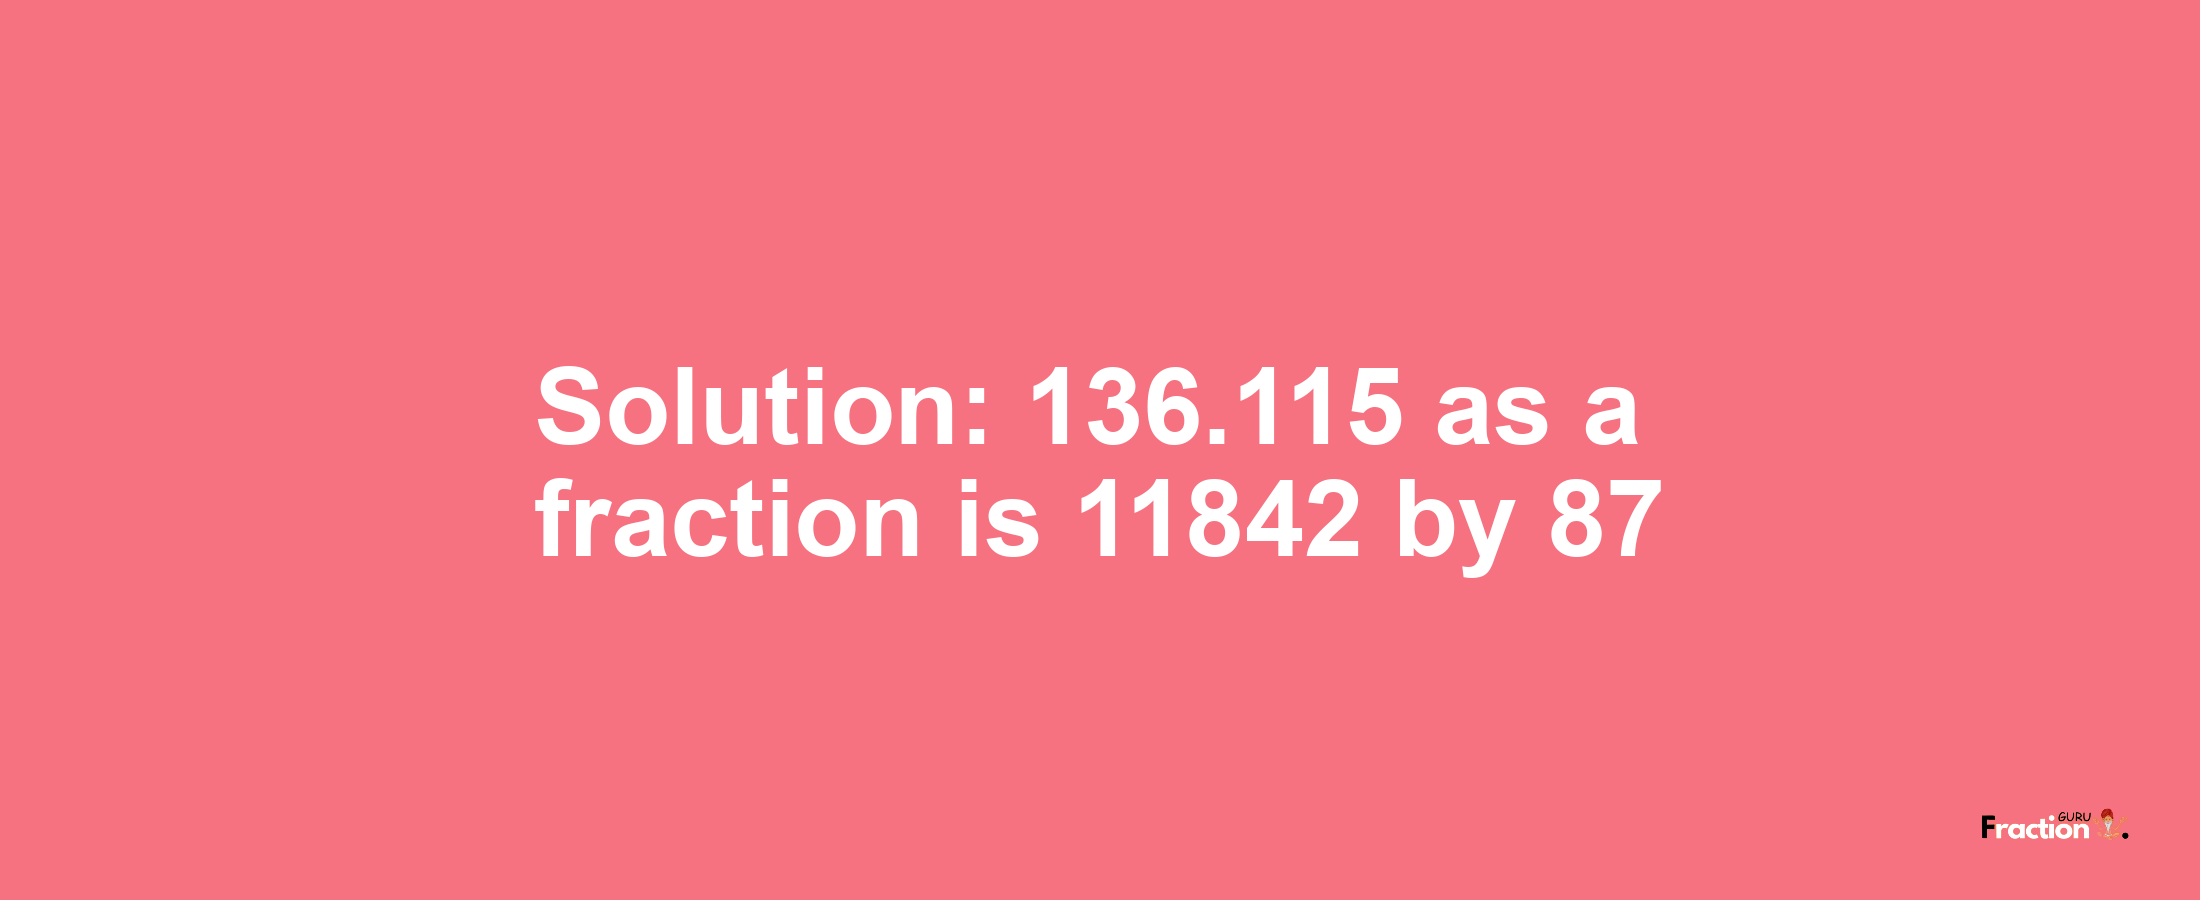 Solution:136.115 as a fraction is 11842/87